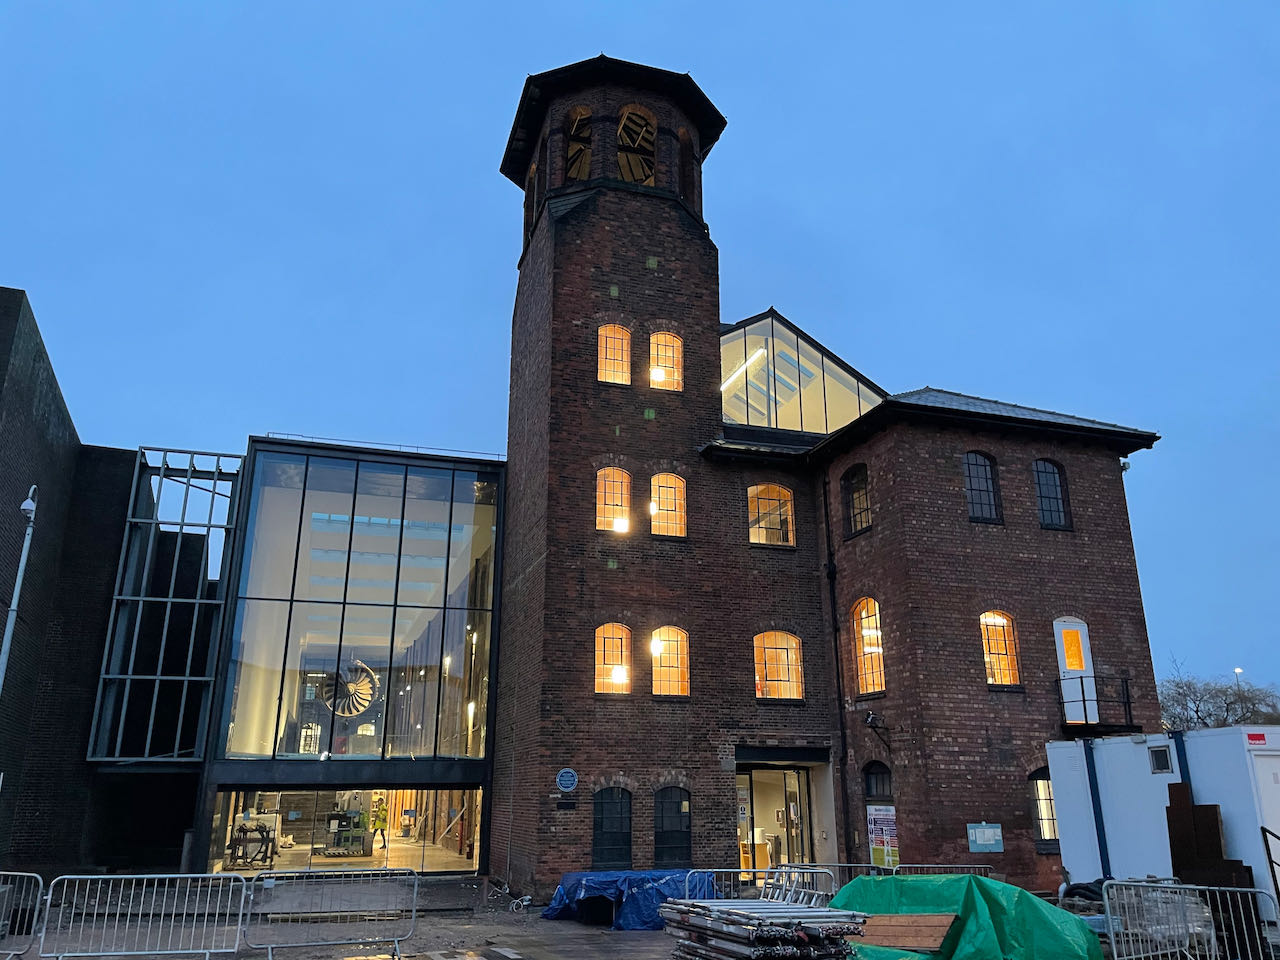 The frontage of the Silk Mill at twilight with the interior lights illuminating the building